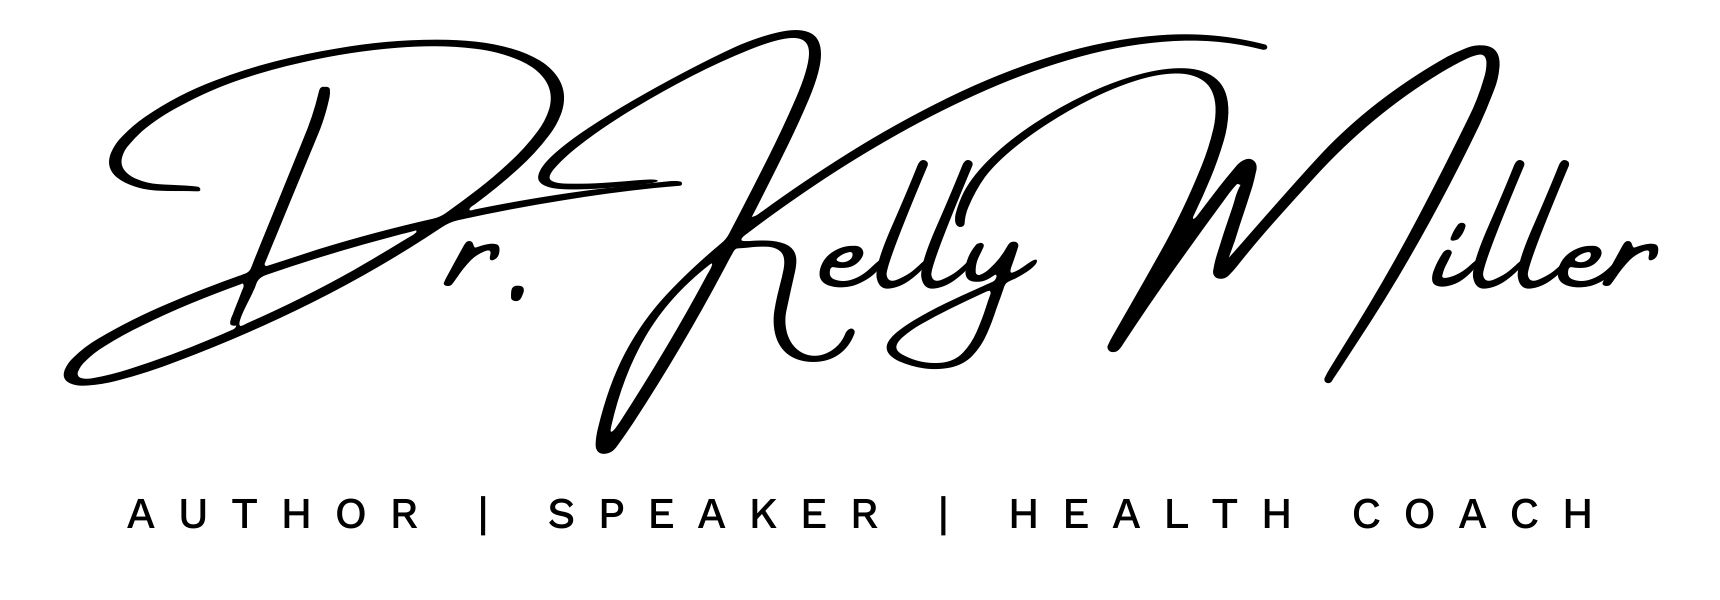 Dr. Kelly Miller | Amazon Best Seller Author | Founder of Saving Your Brain